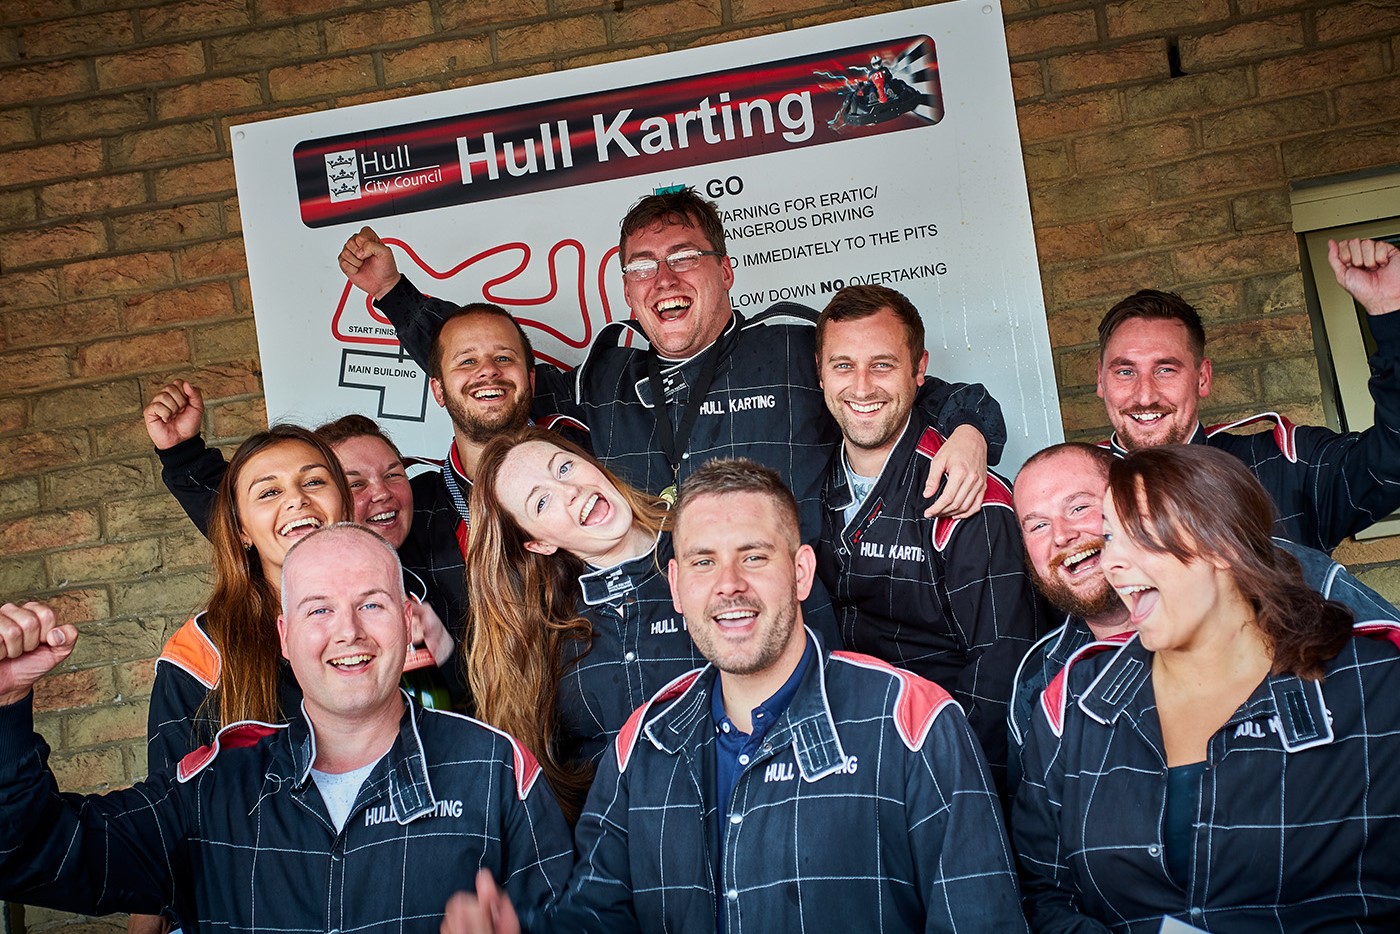 Photograph of a group of people taking part in Karting at Hull Adventure